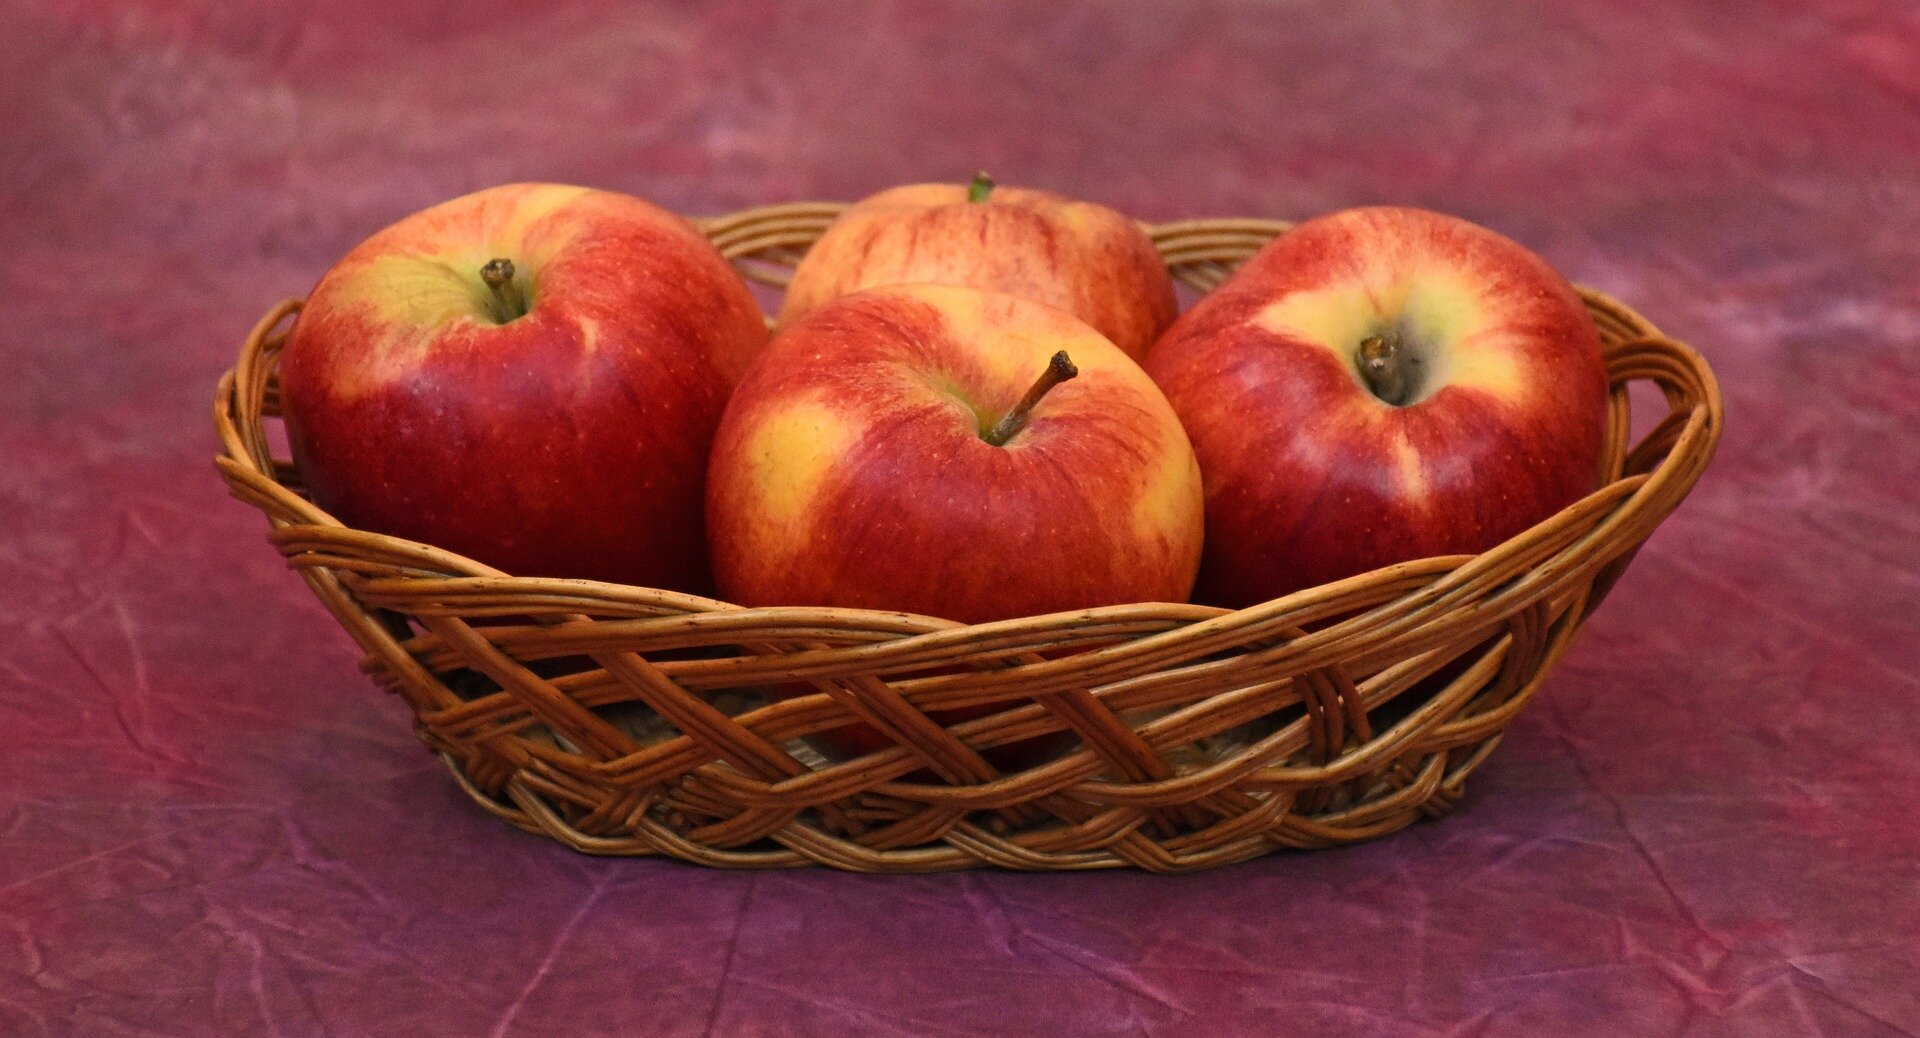 Gala apples: Cold-induced ethylene impacted by harvest maturity, AVG treatment